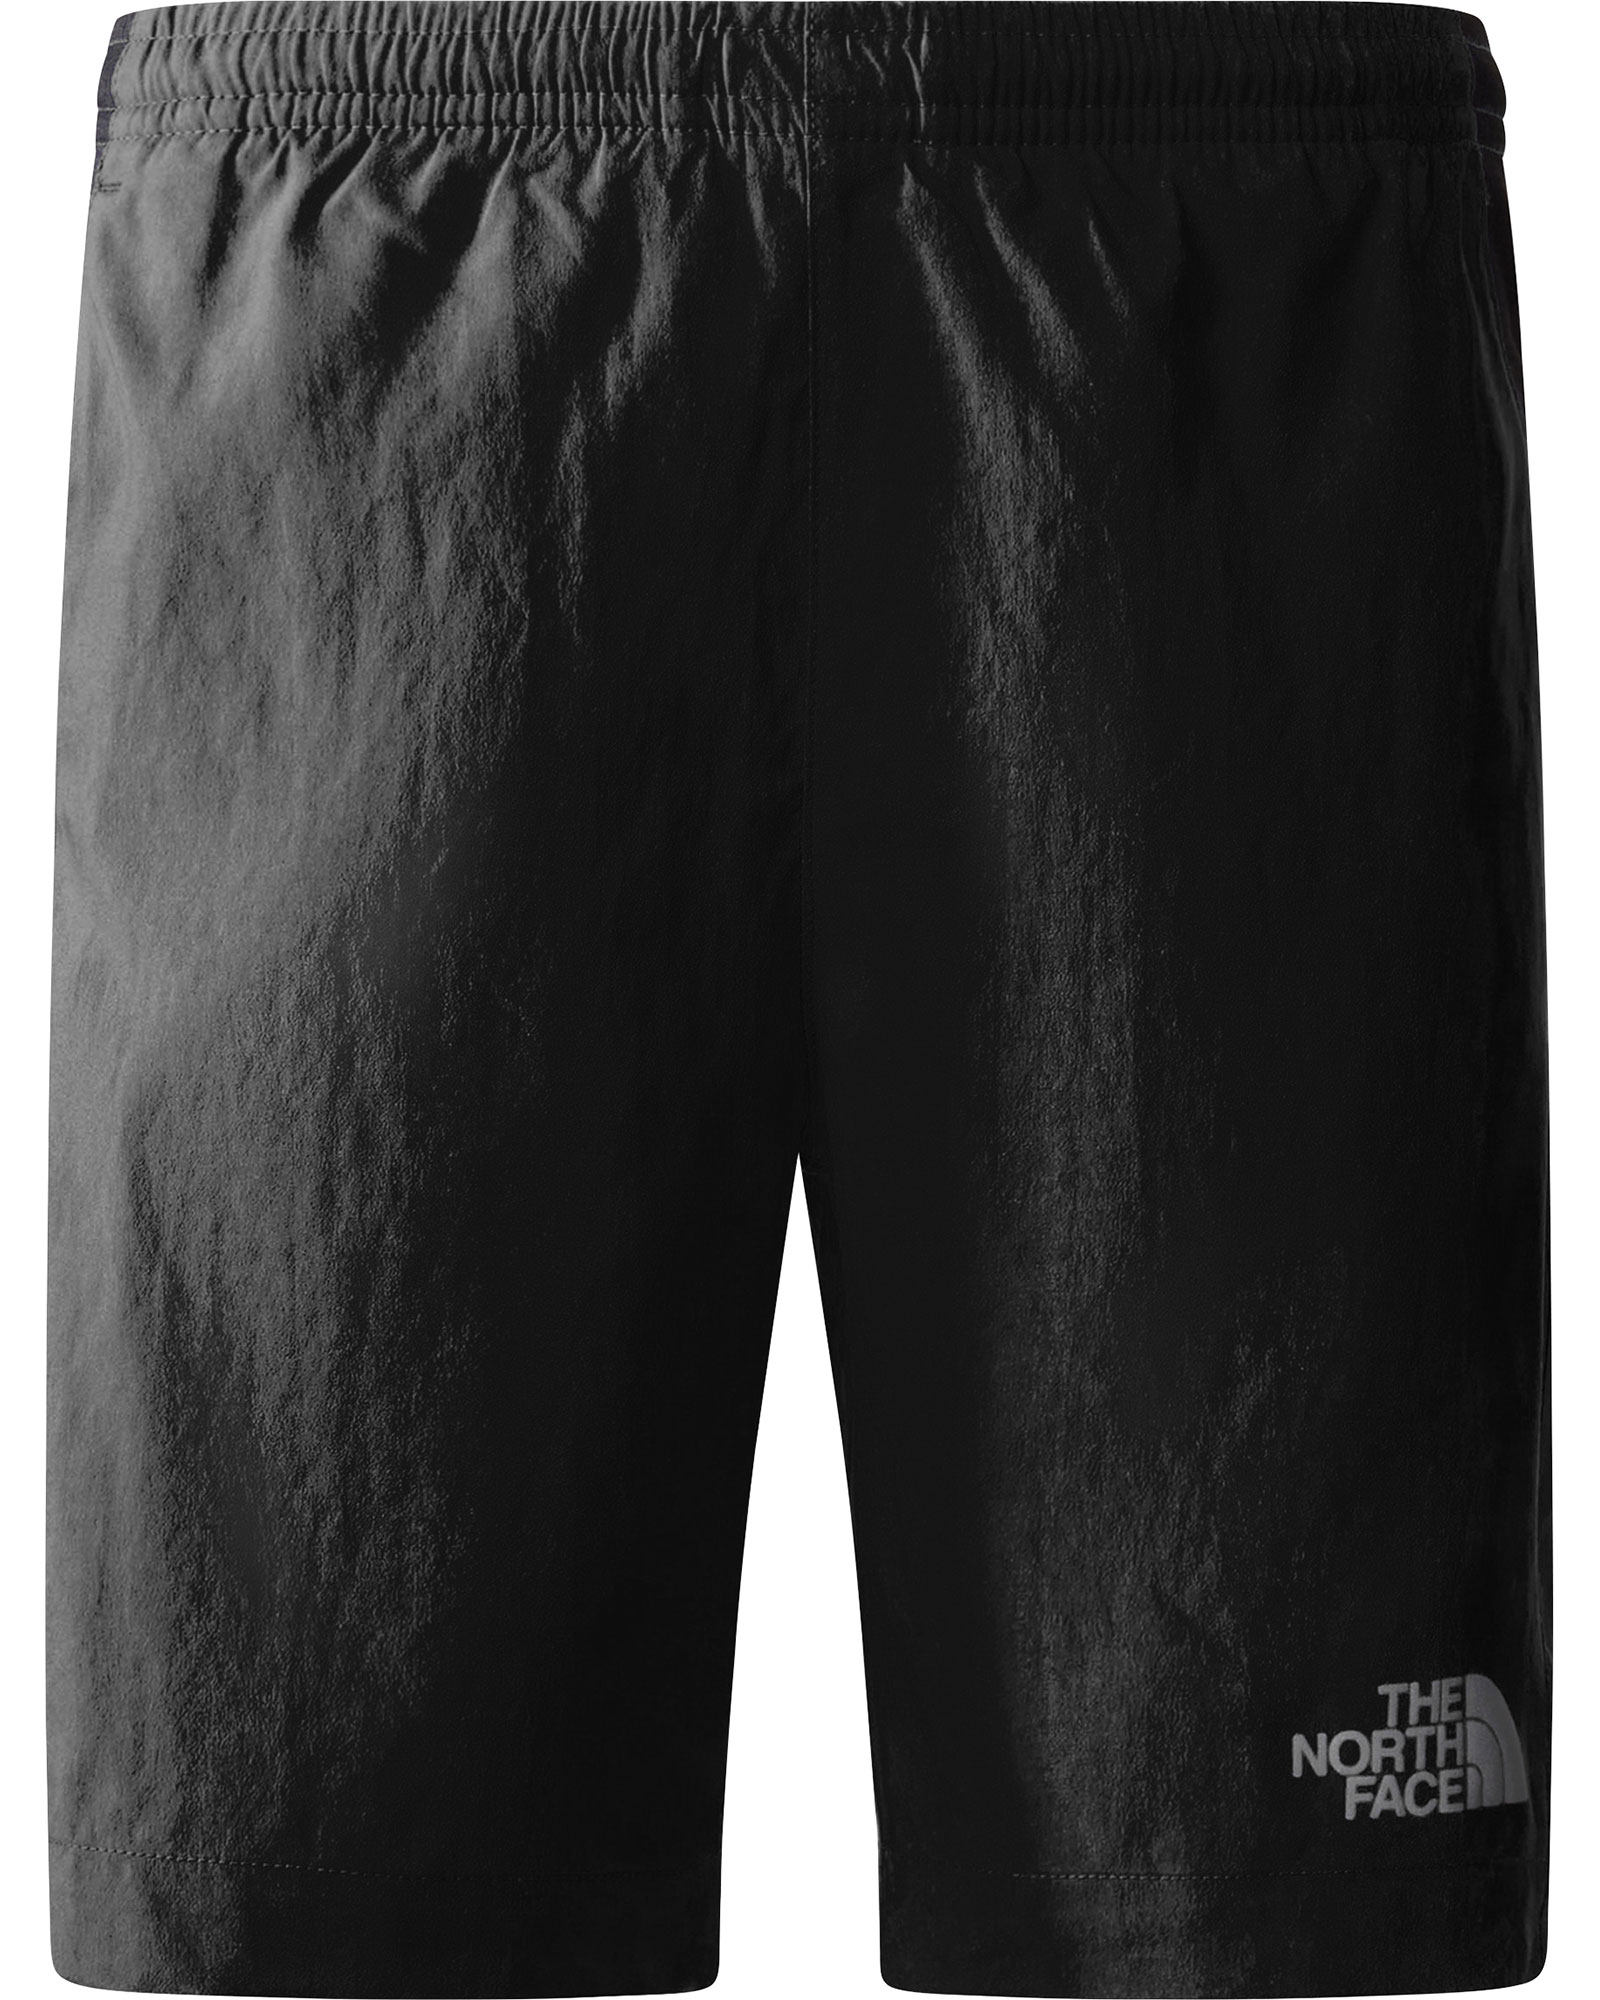 The North Face Boys Never Stop Shorts